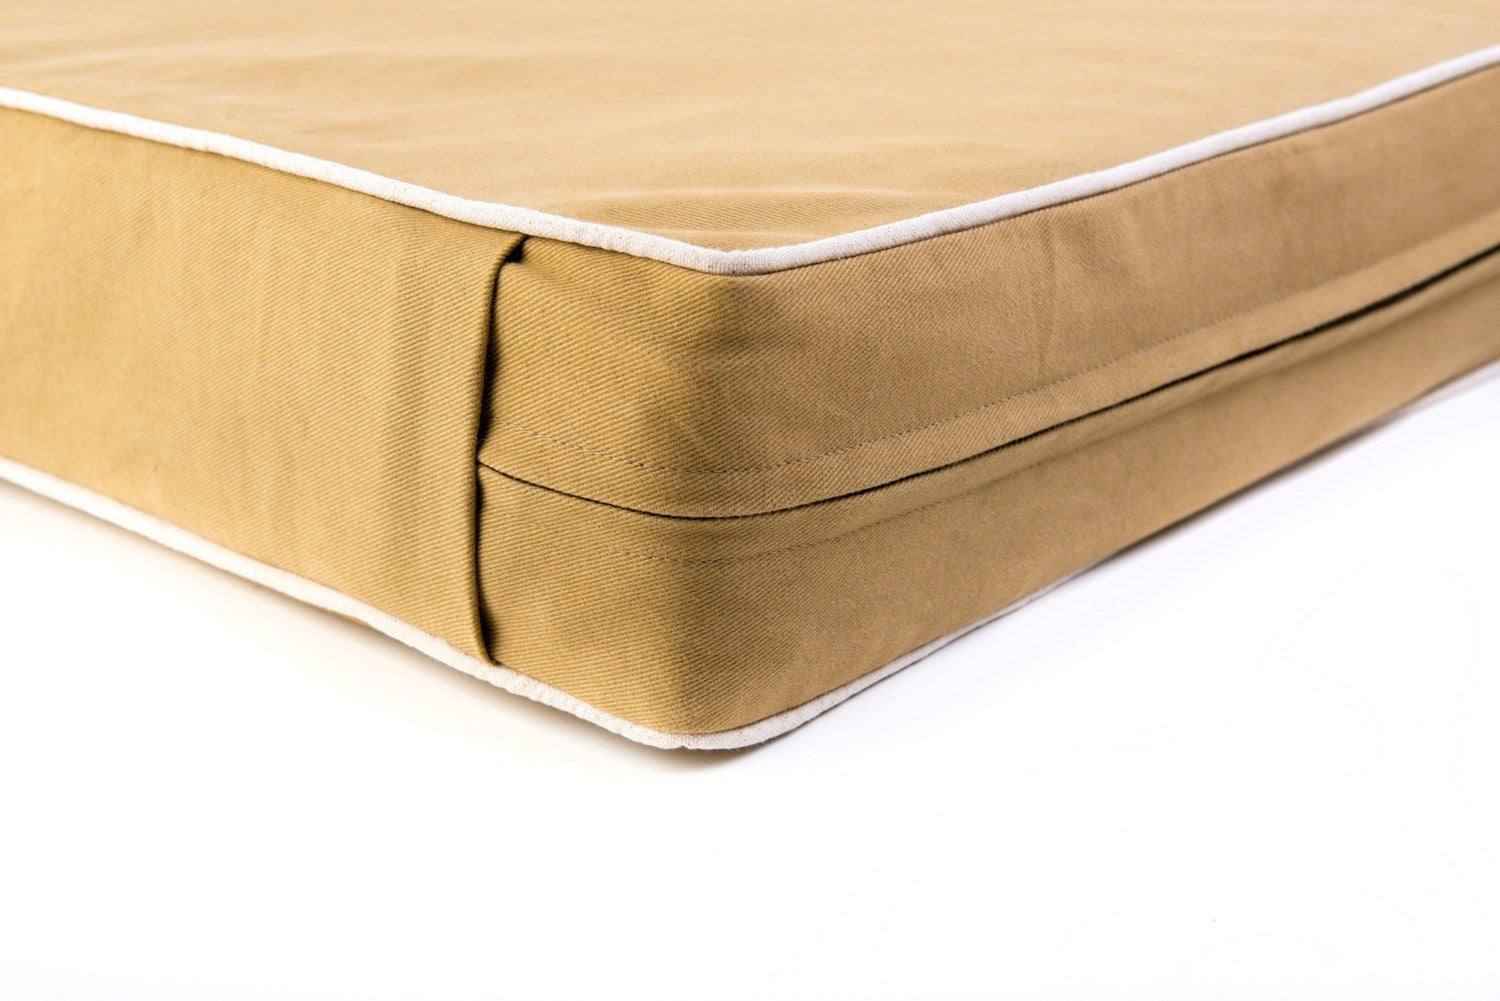 Back detail of Classic dog bed in sand and cream cotton bull denim.